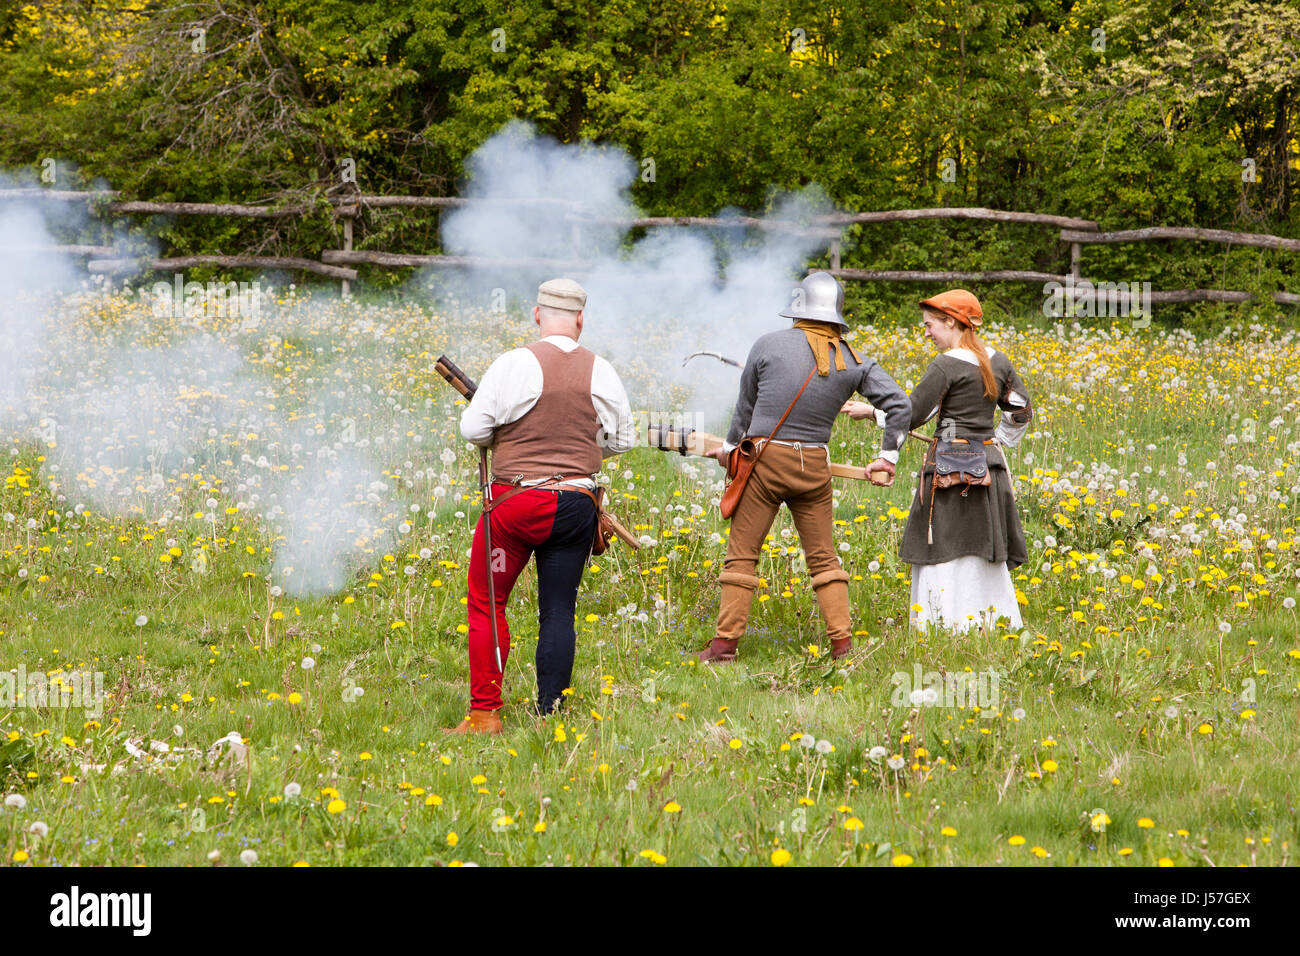 Hand cannons being fired by a reenactment group, reconstructed medieval house, Nienover, Bodenfelde, Lower Saxony, Germany Stock Photo